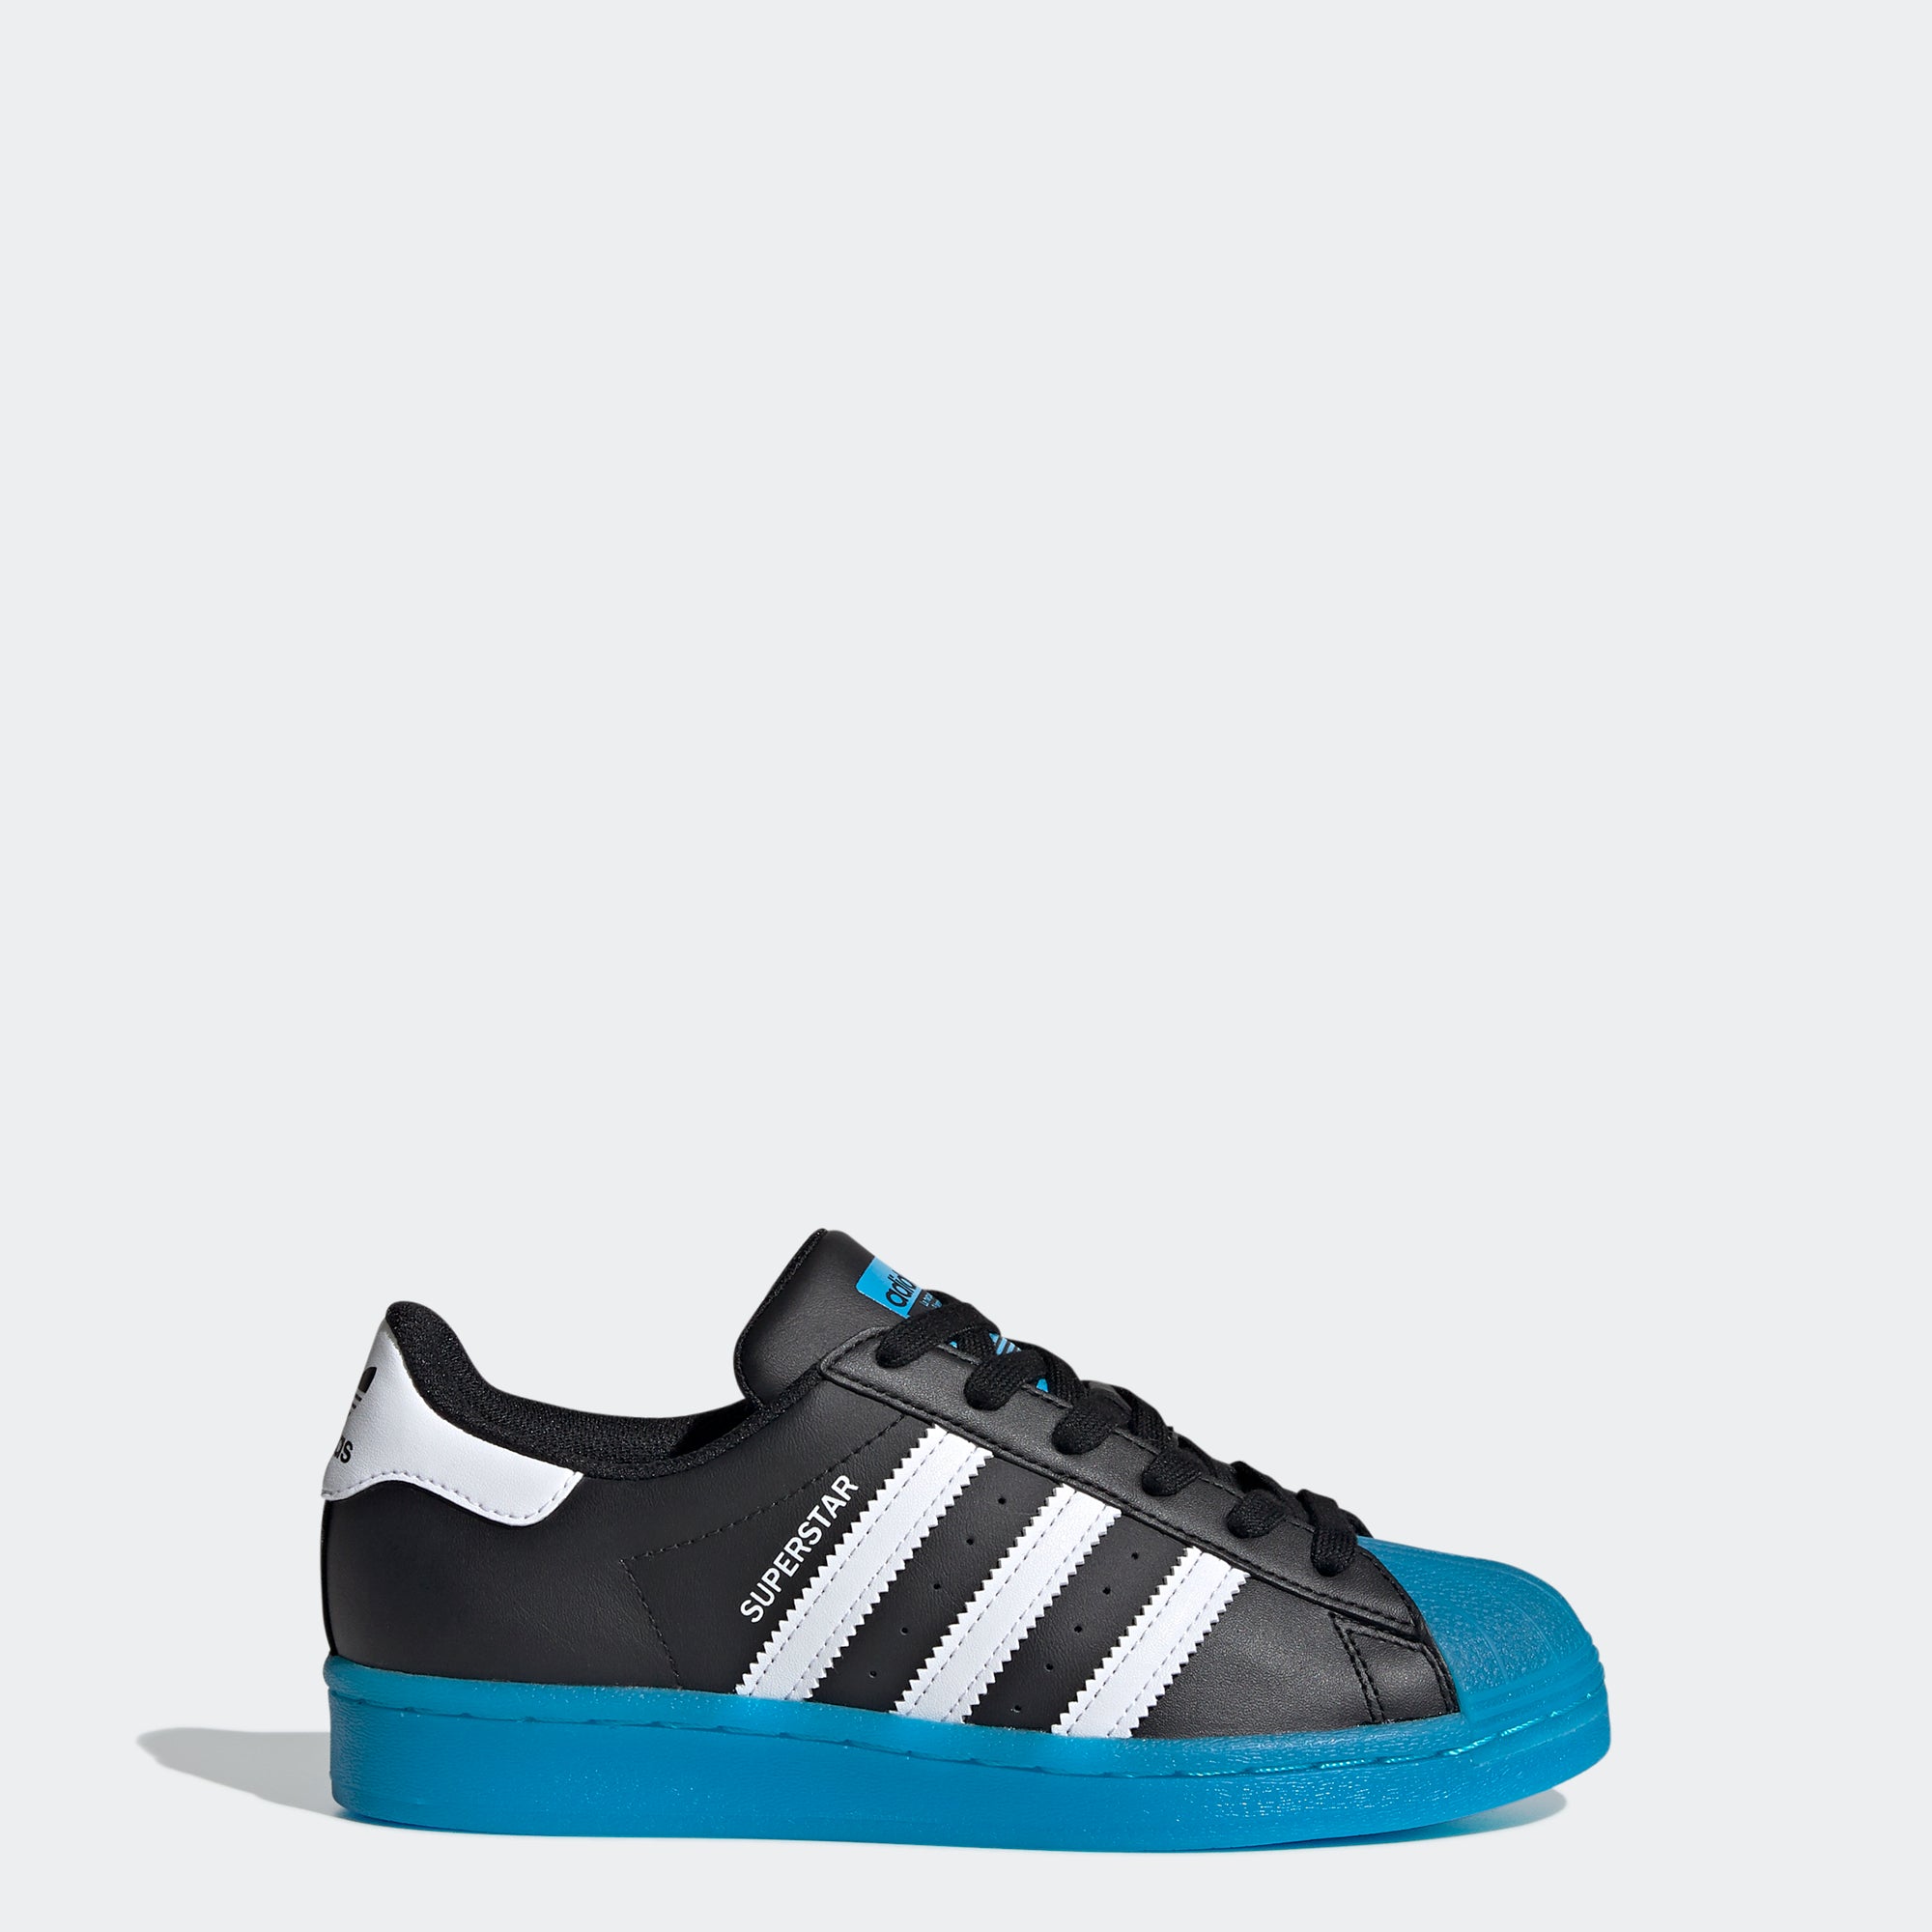 adidas superstar shoes for kids